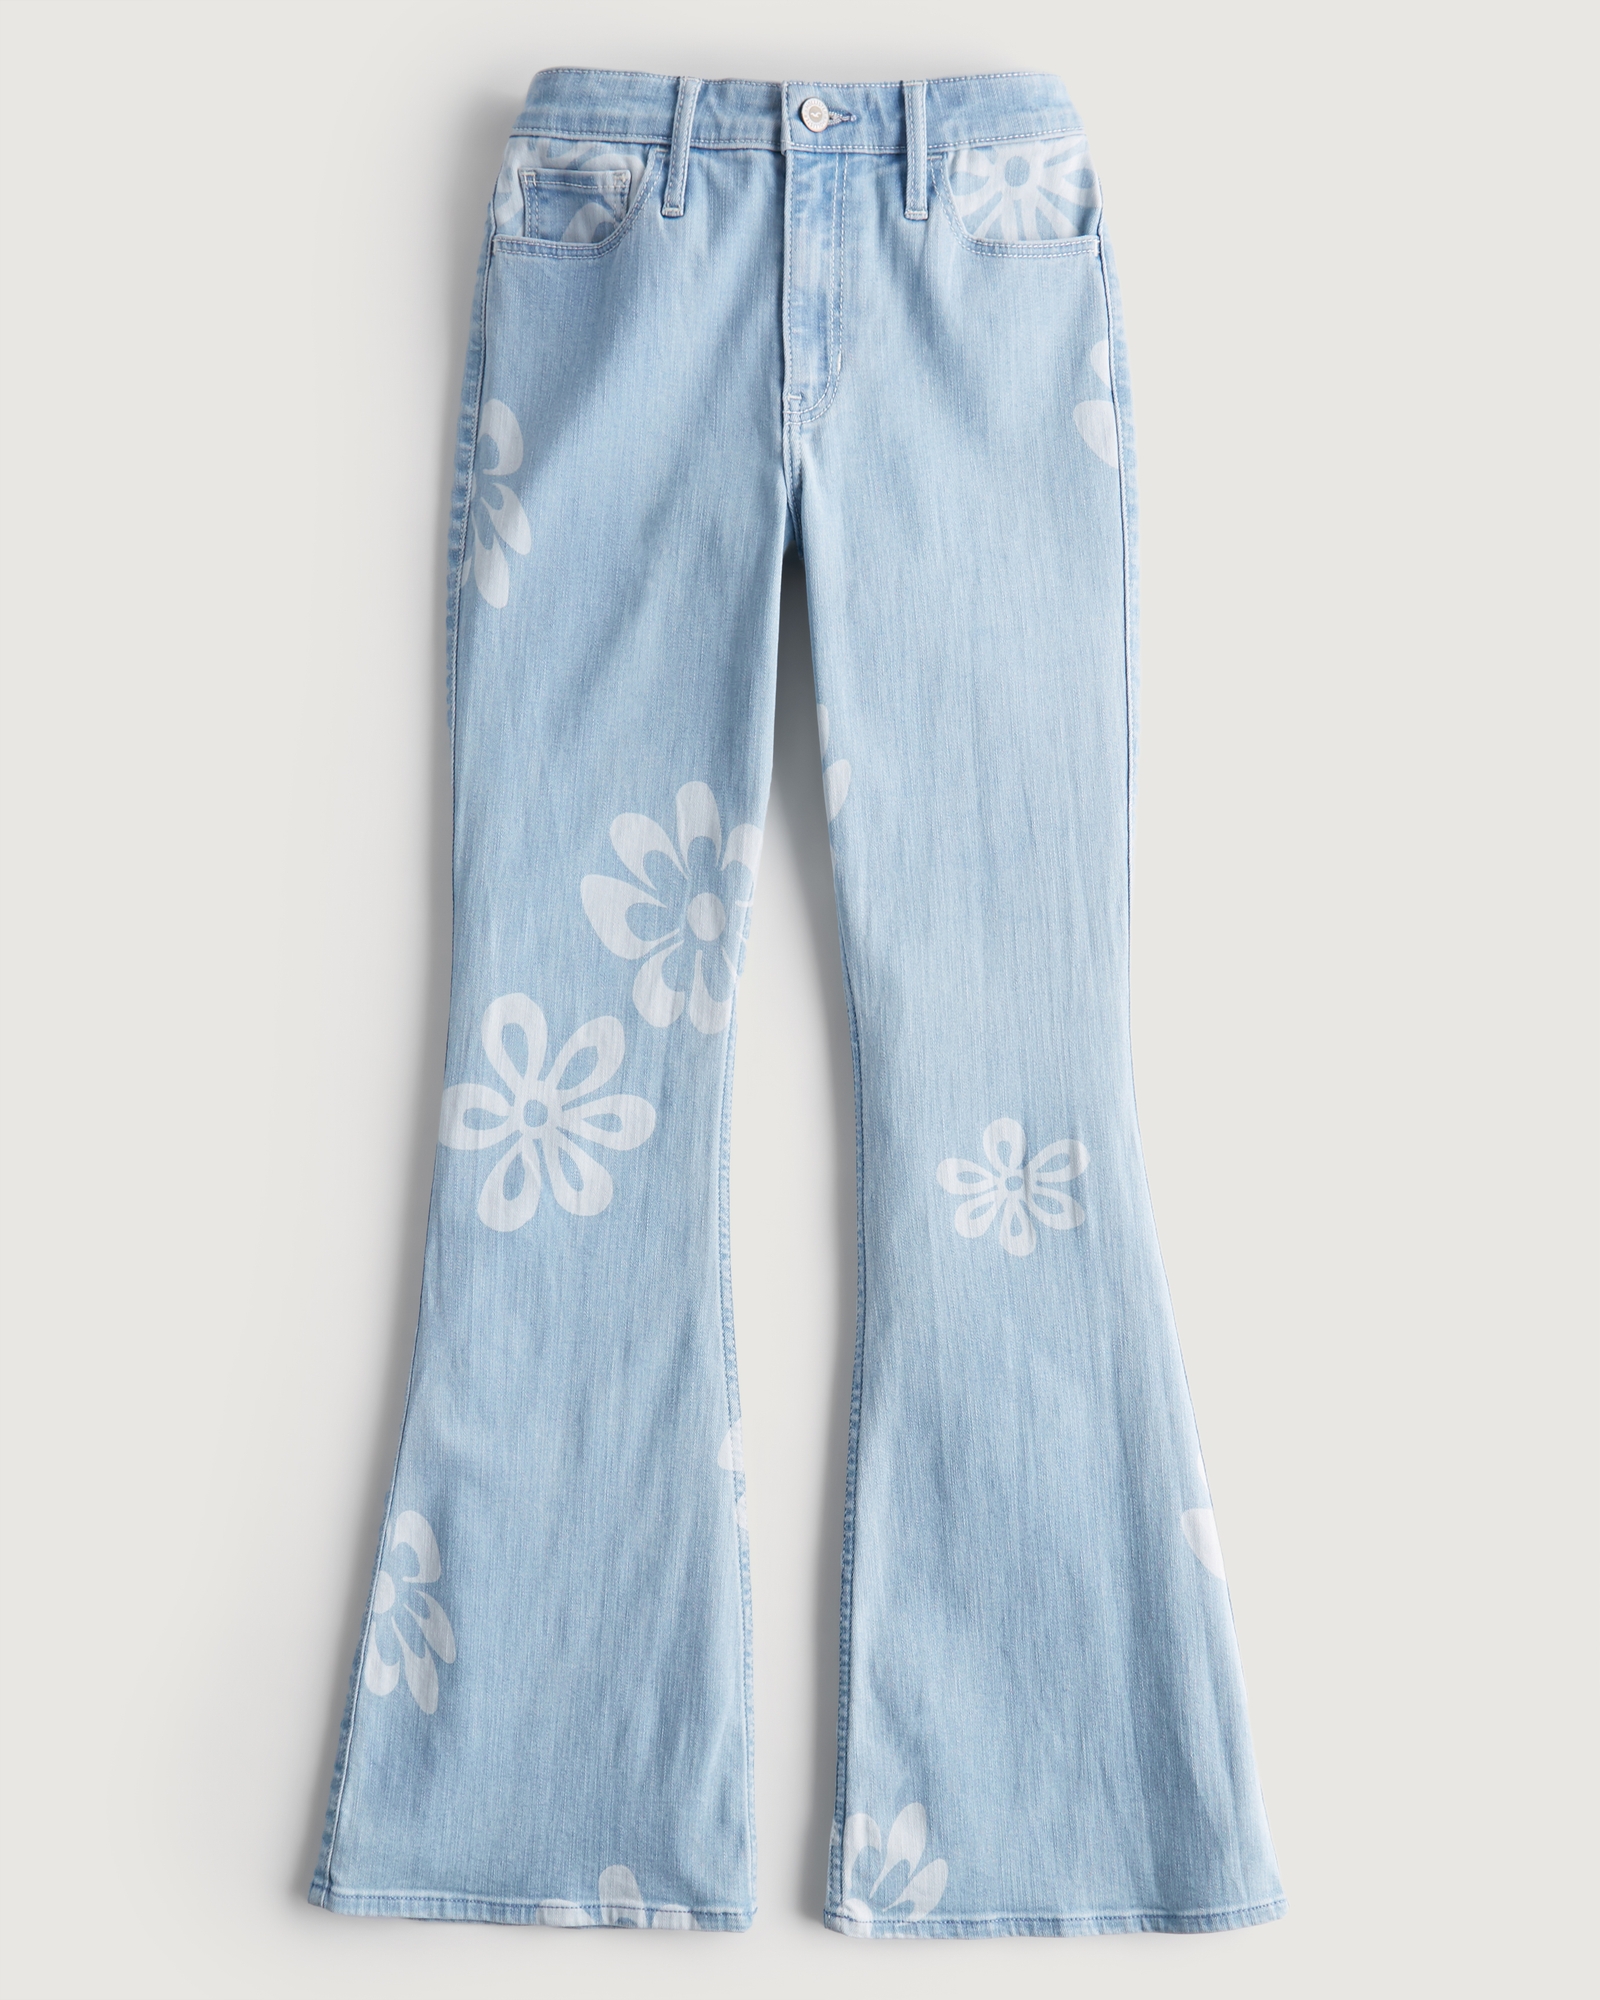 Floral Denim High Rise Fitted Stretch Jeggings - Small at